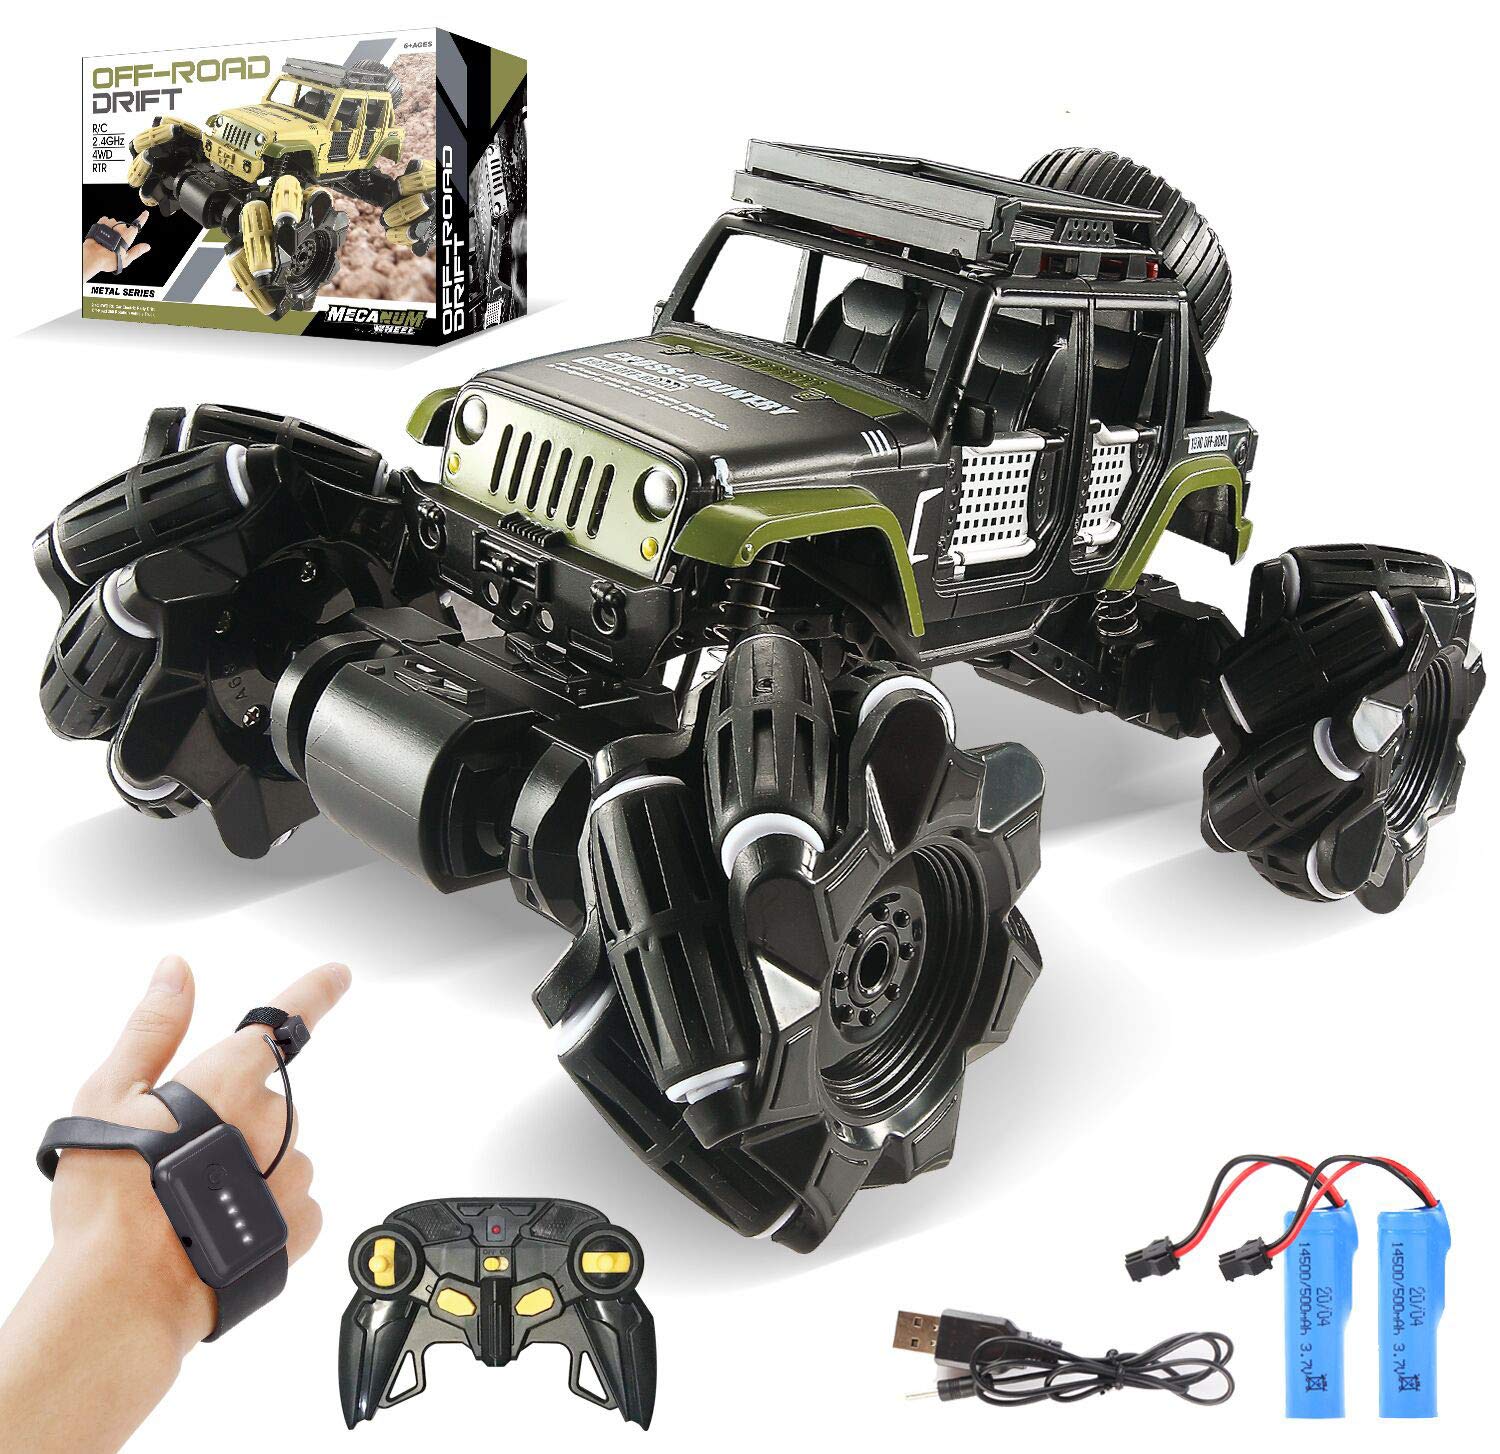 LOOZIX Remote Control Car, 1:16 Metal Drift RC Cars 360° Rotating 4WD 2.4Ghz Gesture Sensor Control Monster Truck for Kids All Terrains Crawler RC Vehicle Rechargeable Batteries for Boys Kids